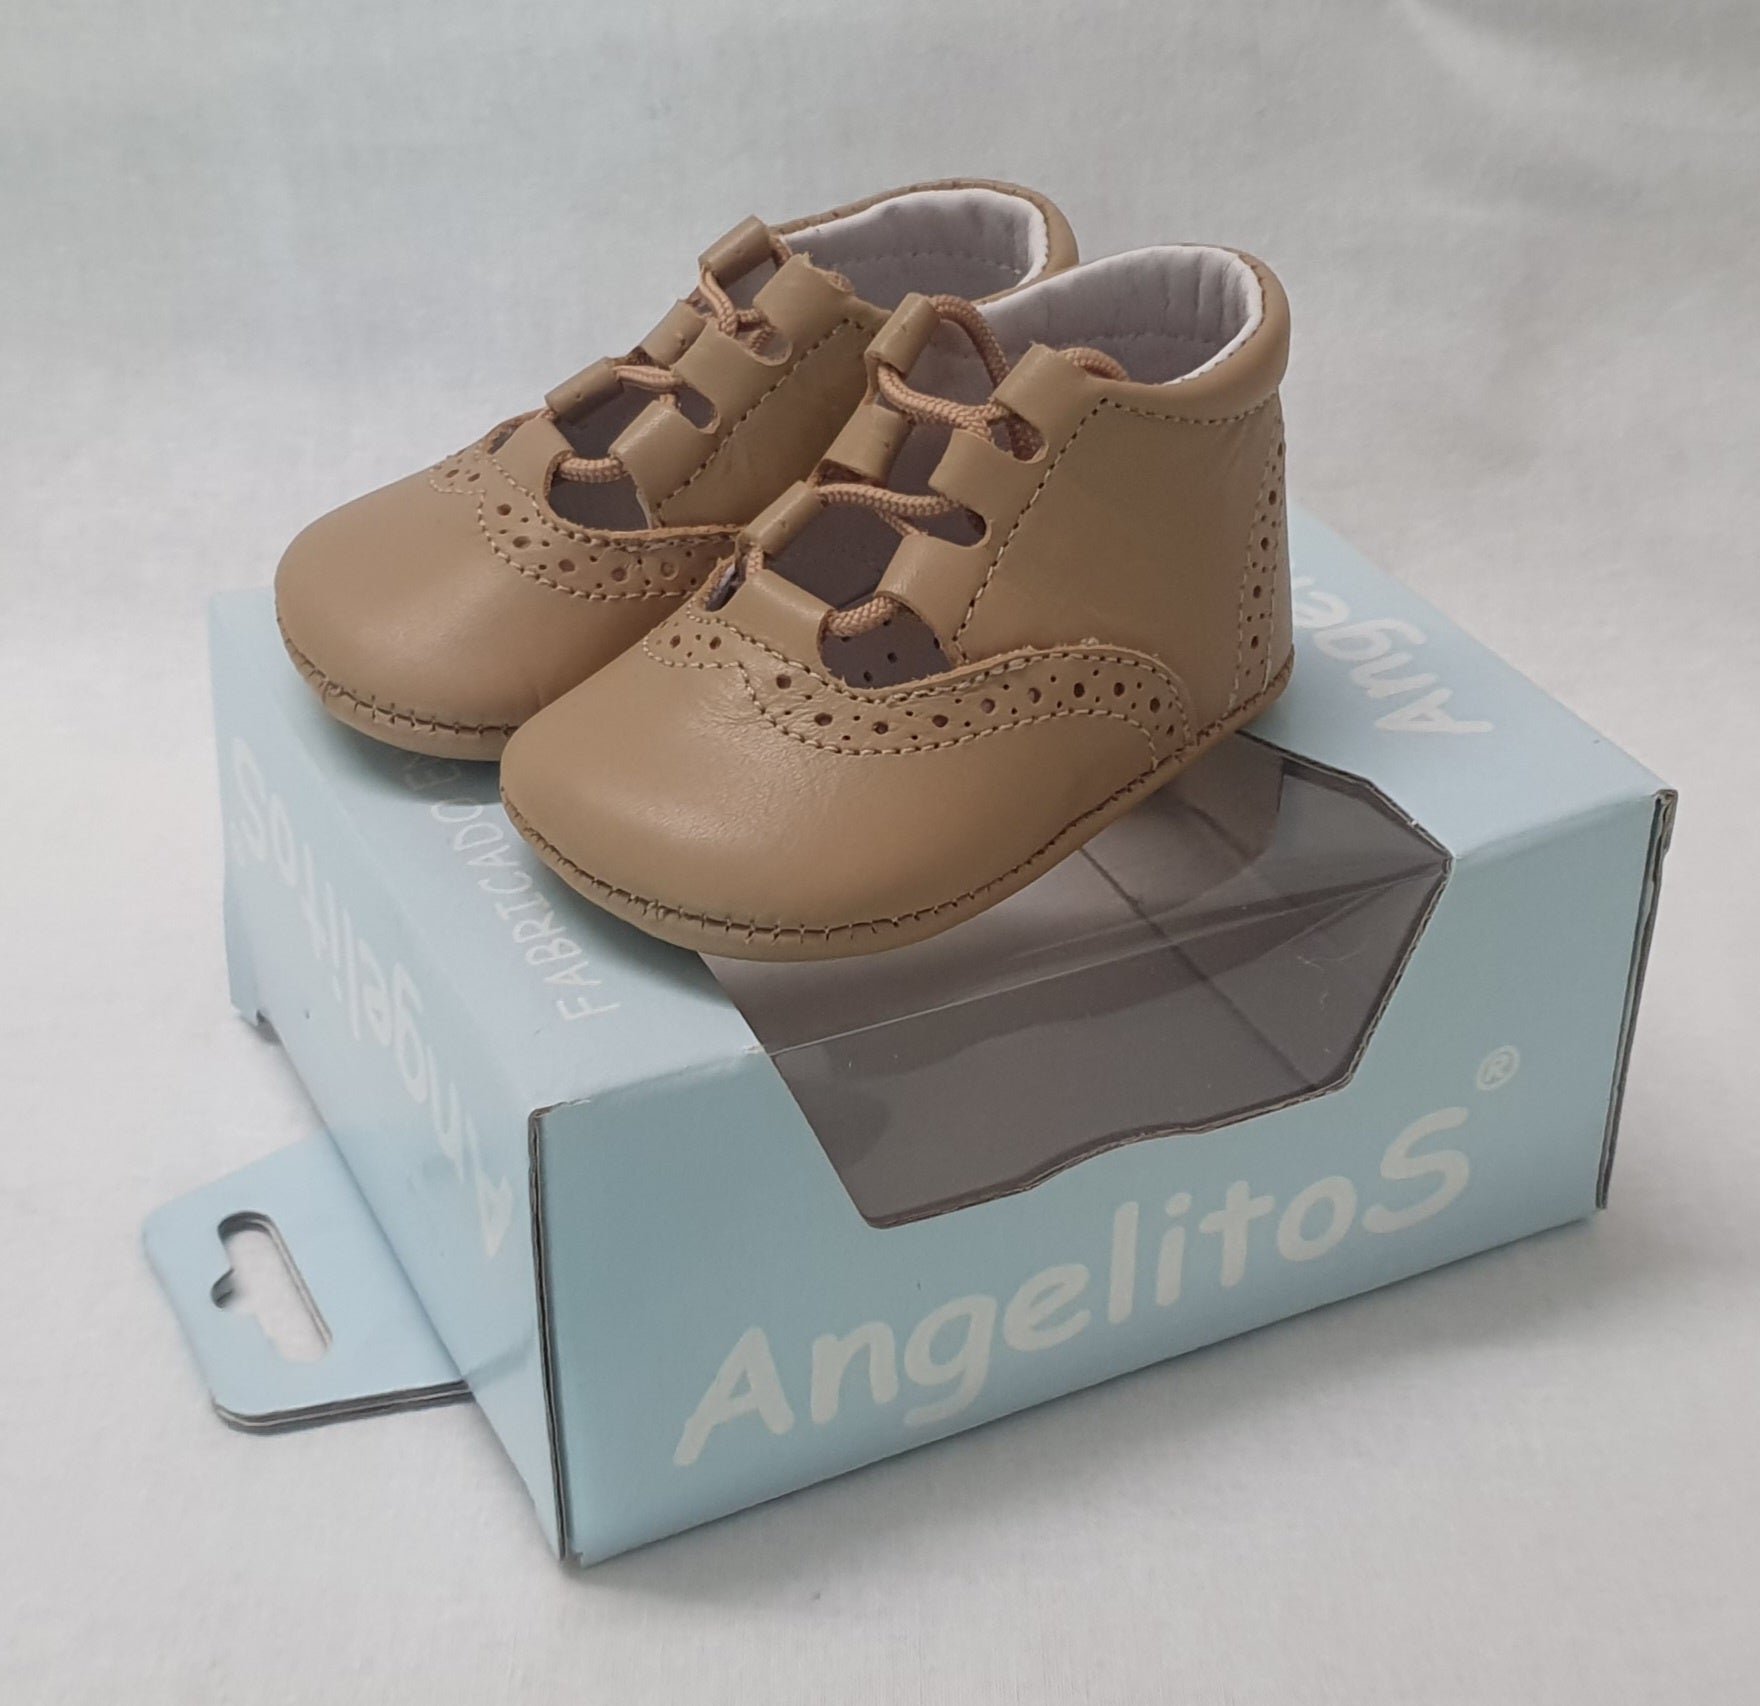 Baby Shoes Angelitos 256 - Camel Size 16